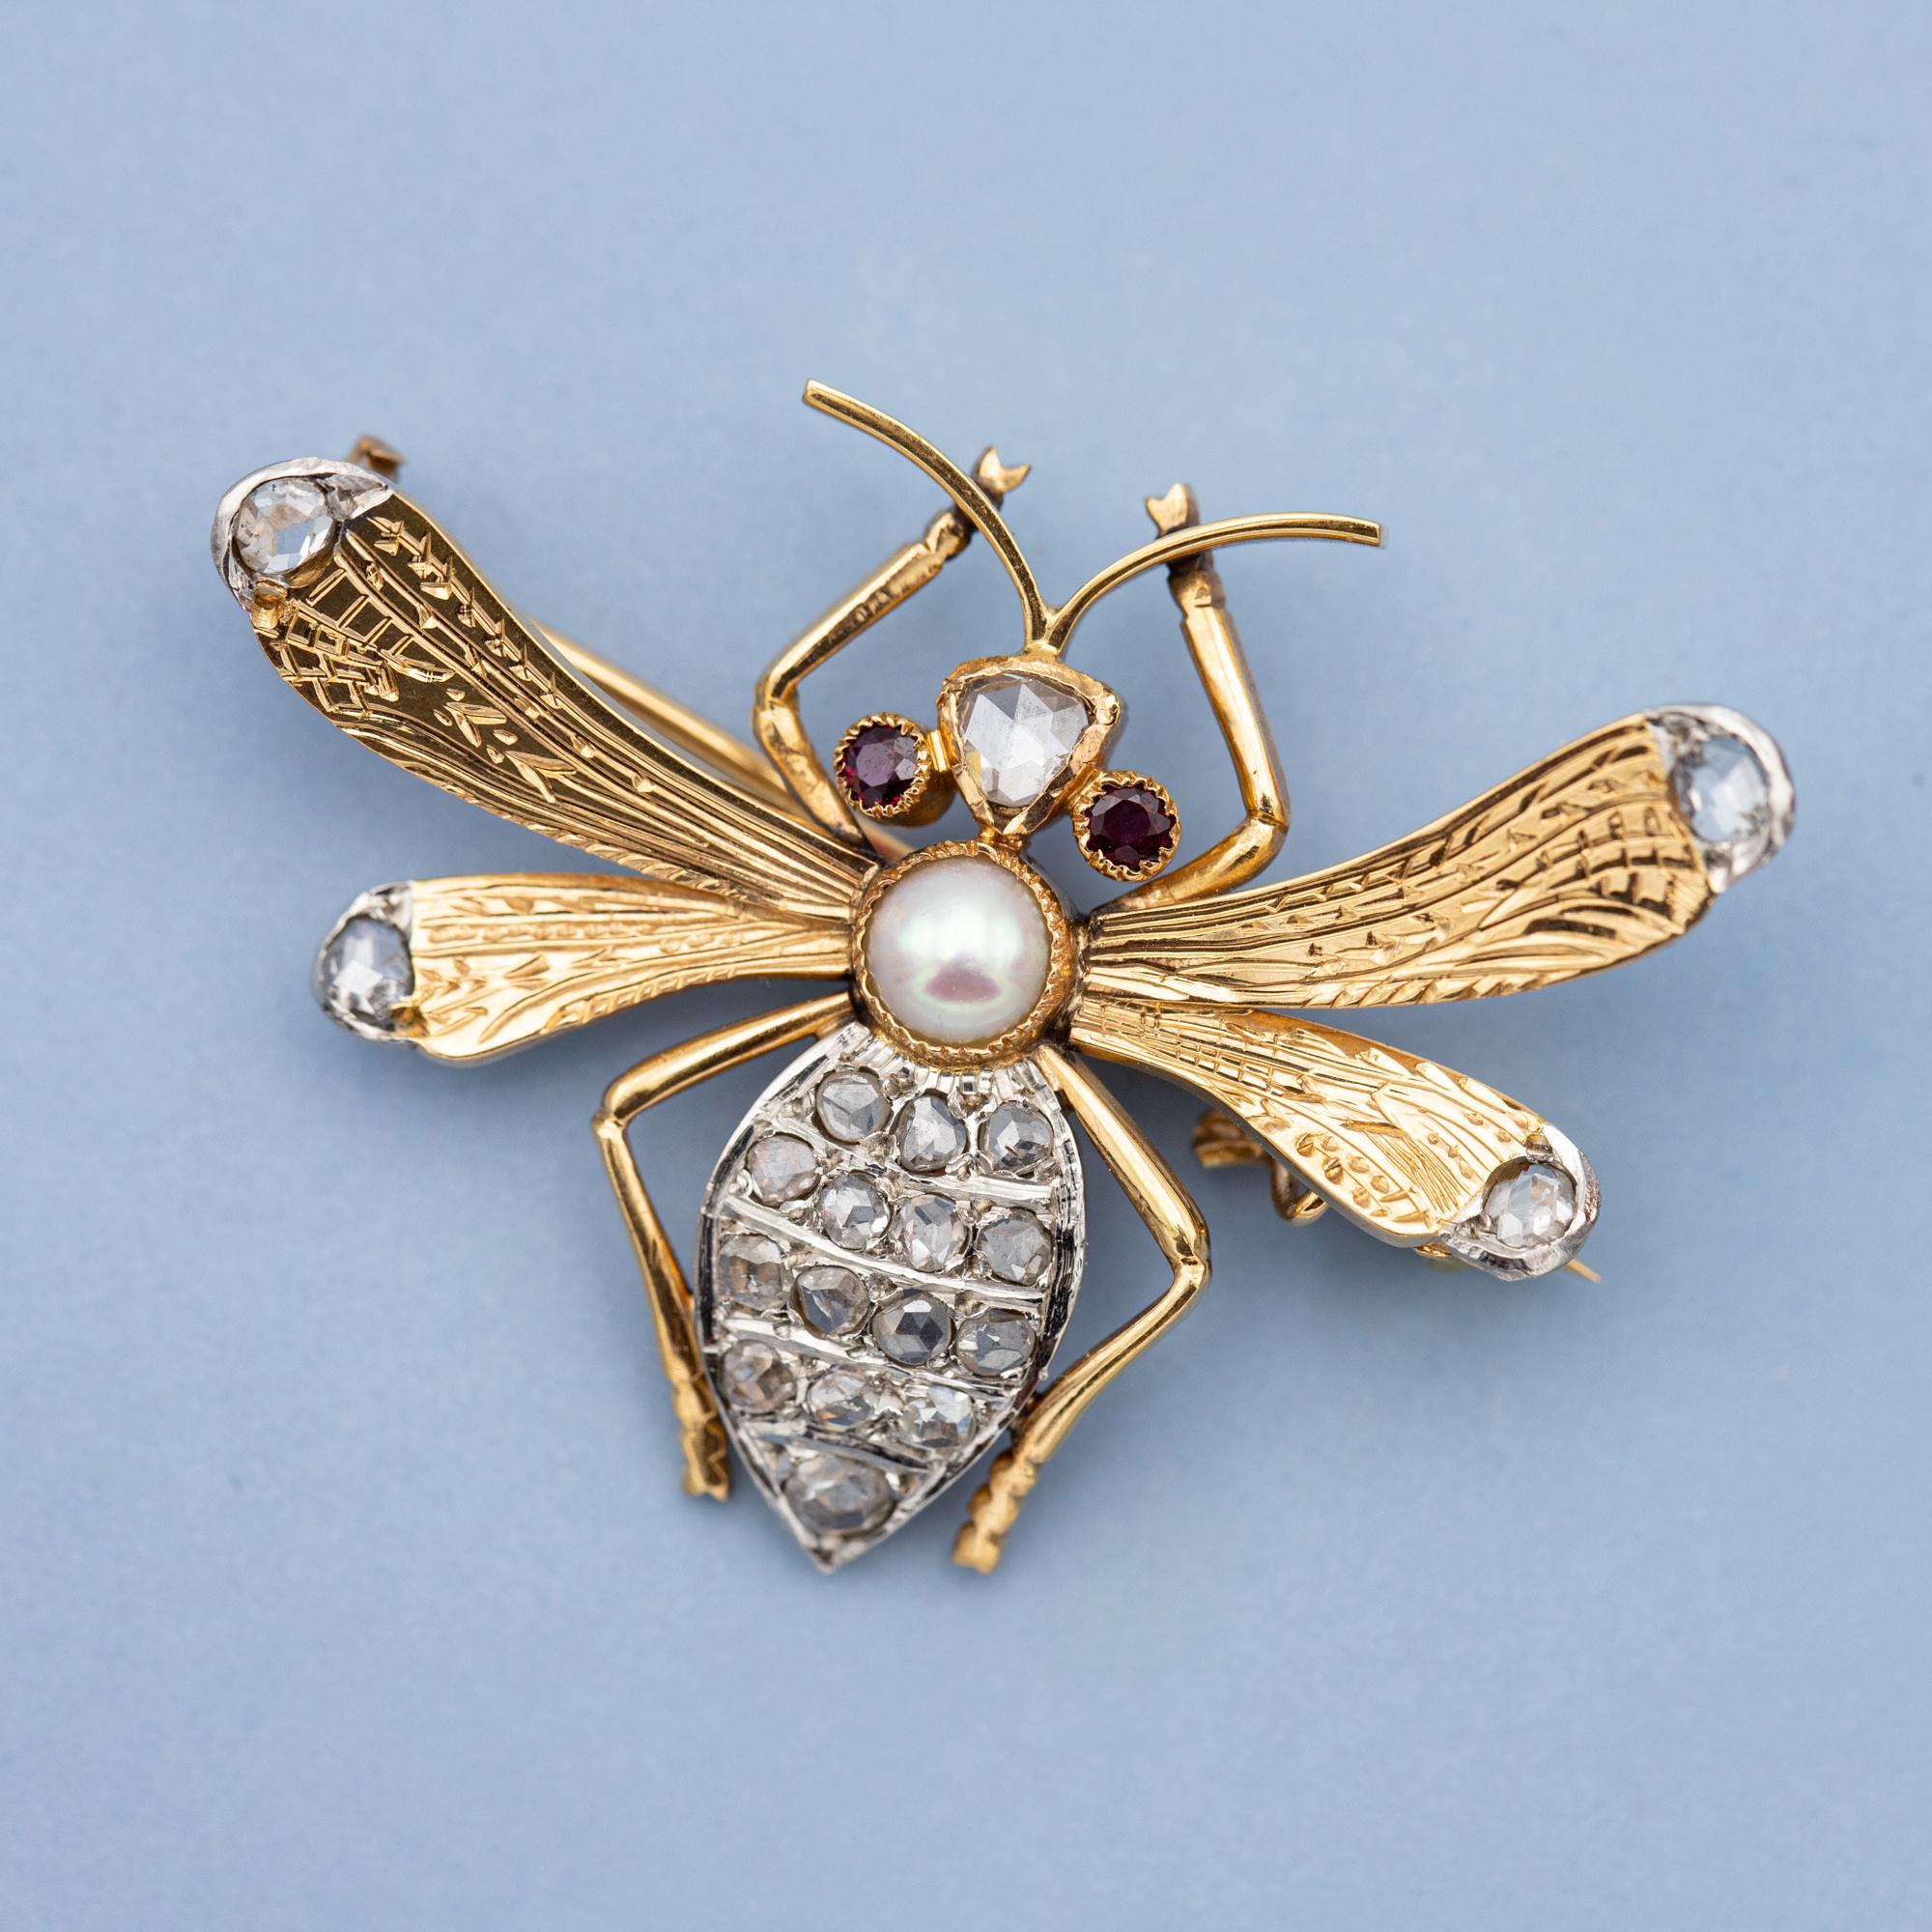 Rare Victorian brooch - 18 K Yellow gold Queen Bee set with rose cut diamond For Sale 1